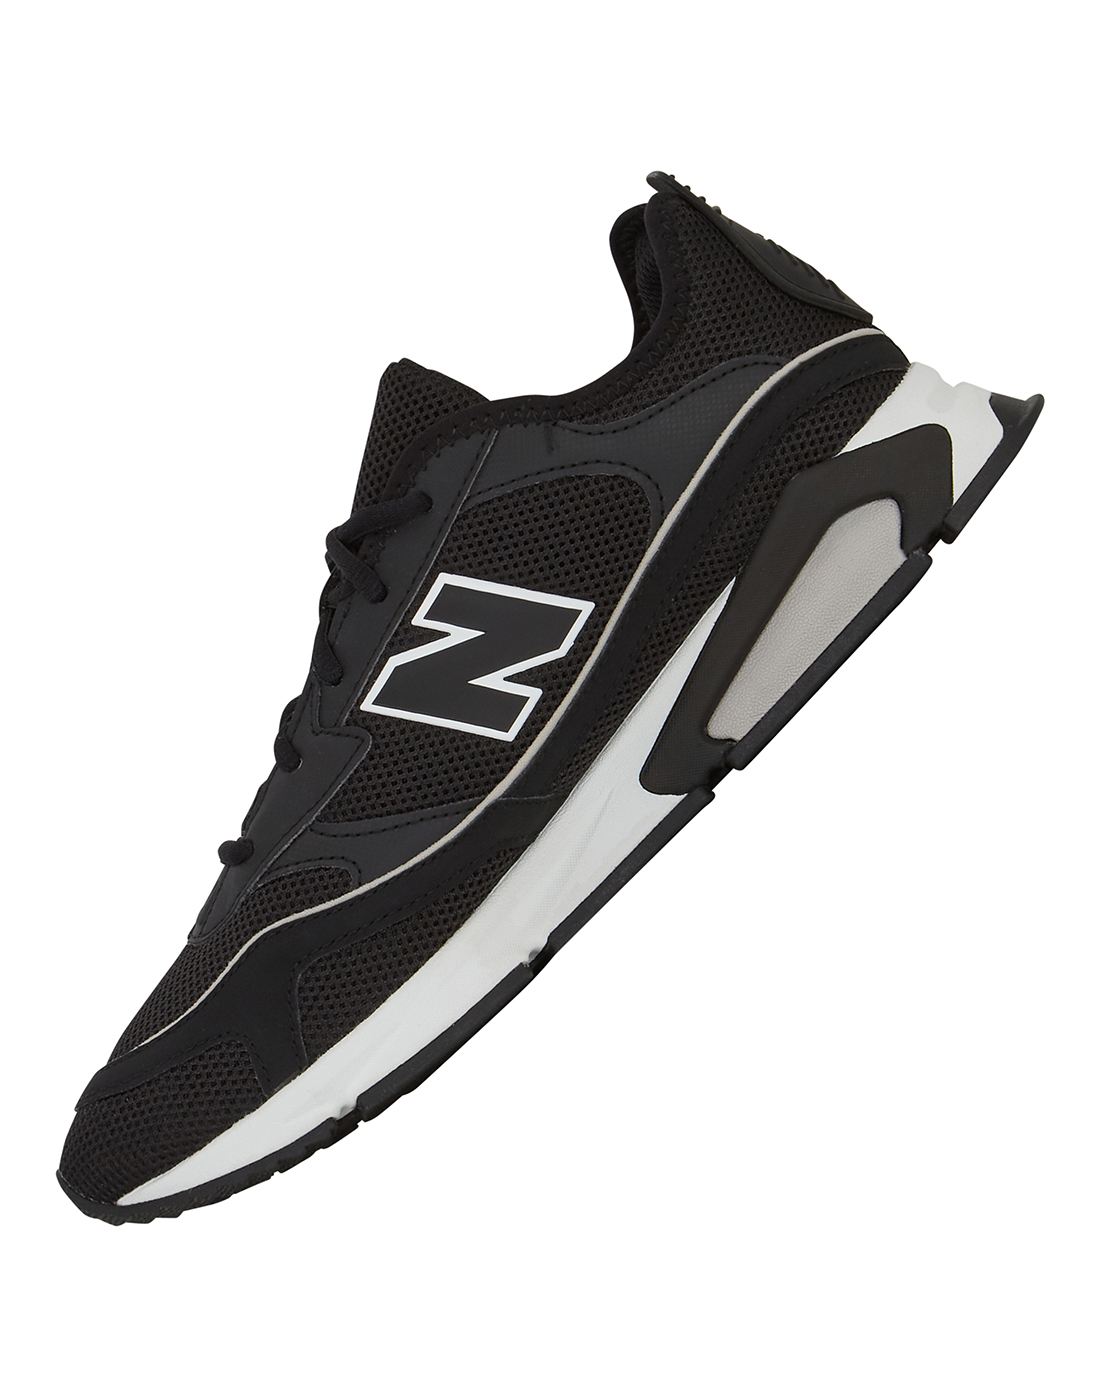 New Balance Mens X Racer Trainers - Black | Life Style Sports IE